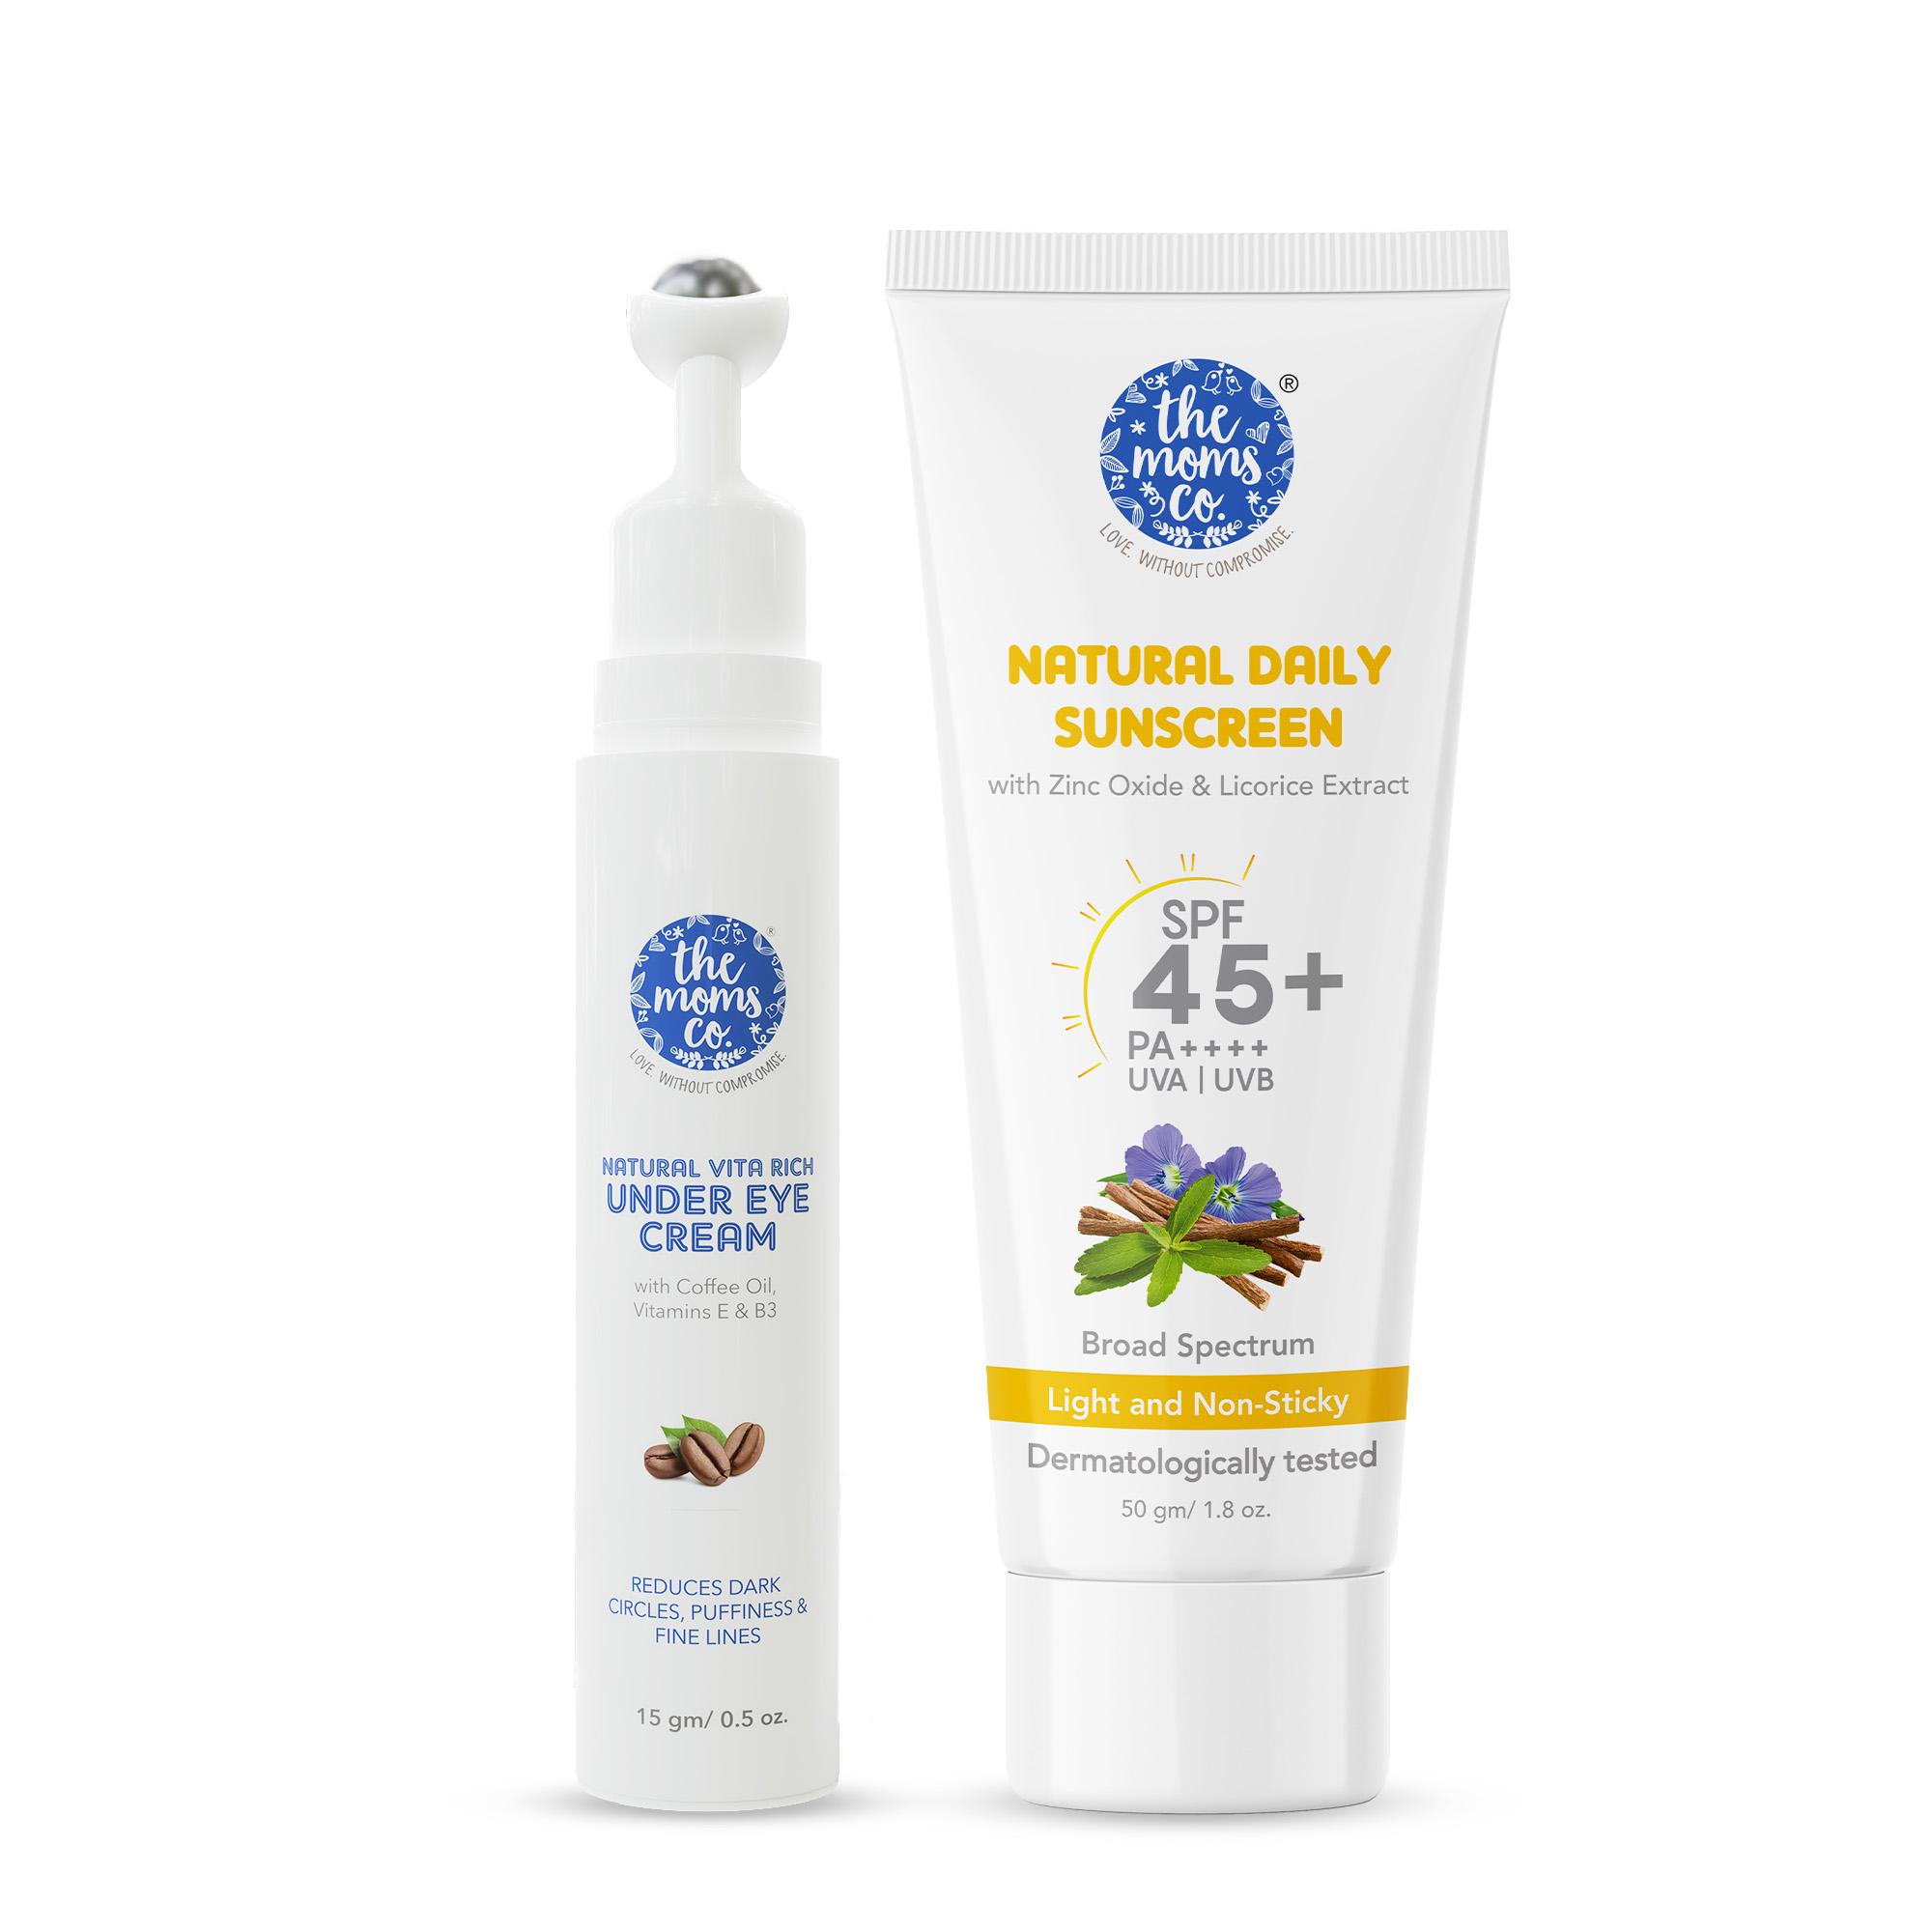 The Mom's Co. | The Mom's Co. Vita Rich Under Eye Cream & Mineral Sunscreen With 25% Zinc Oxide Spf 45+ Pa++++ Combo